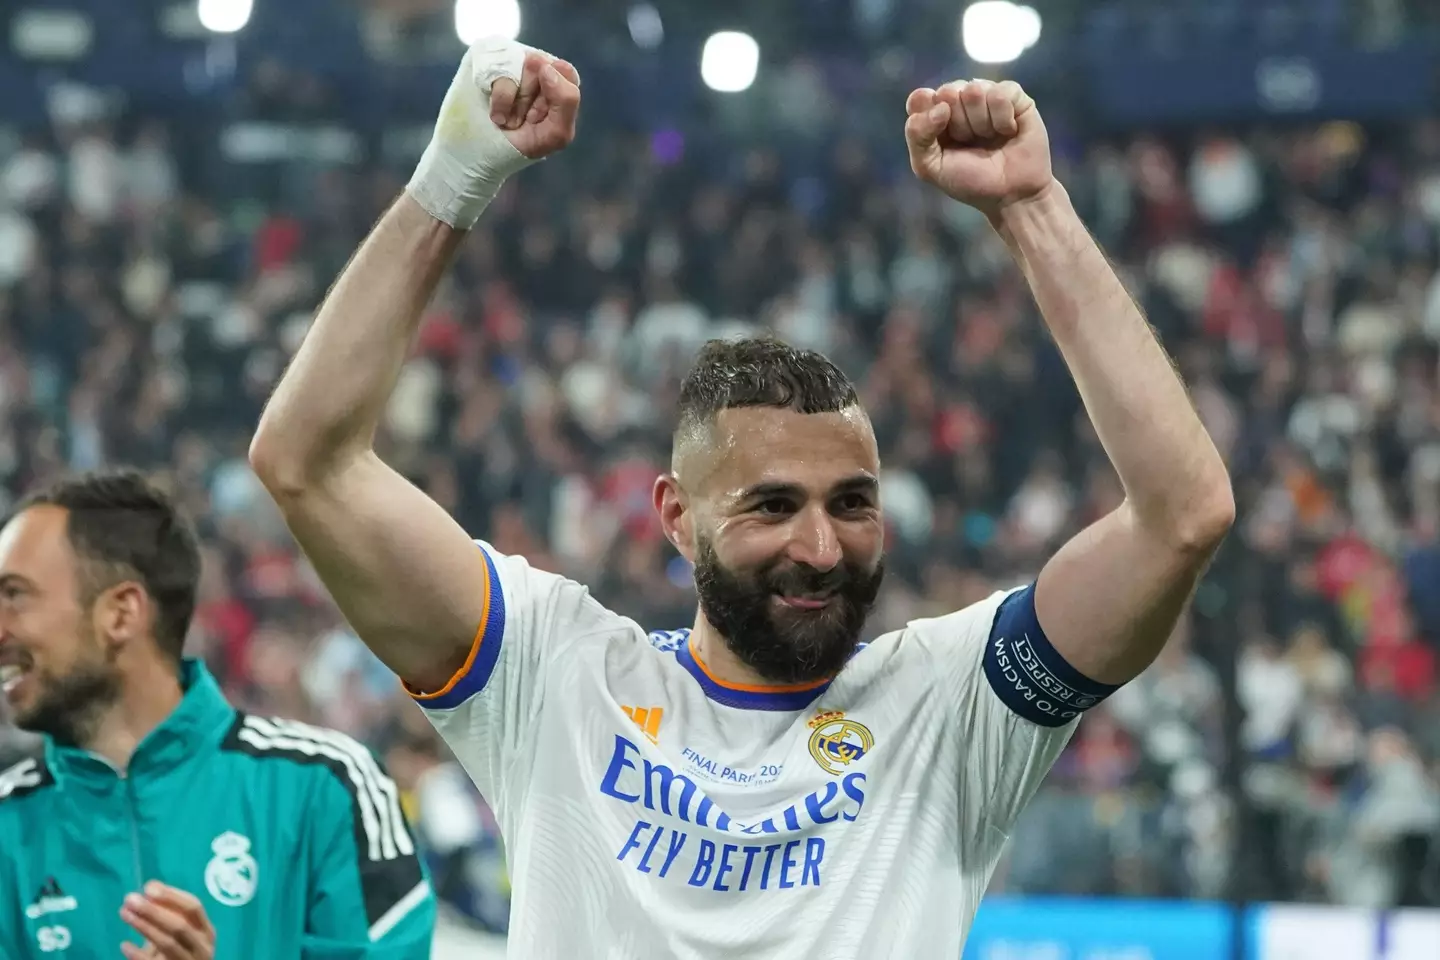 Karim Benzema is the favourite to win the award (Image: PA)